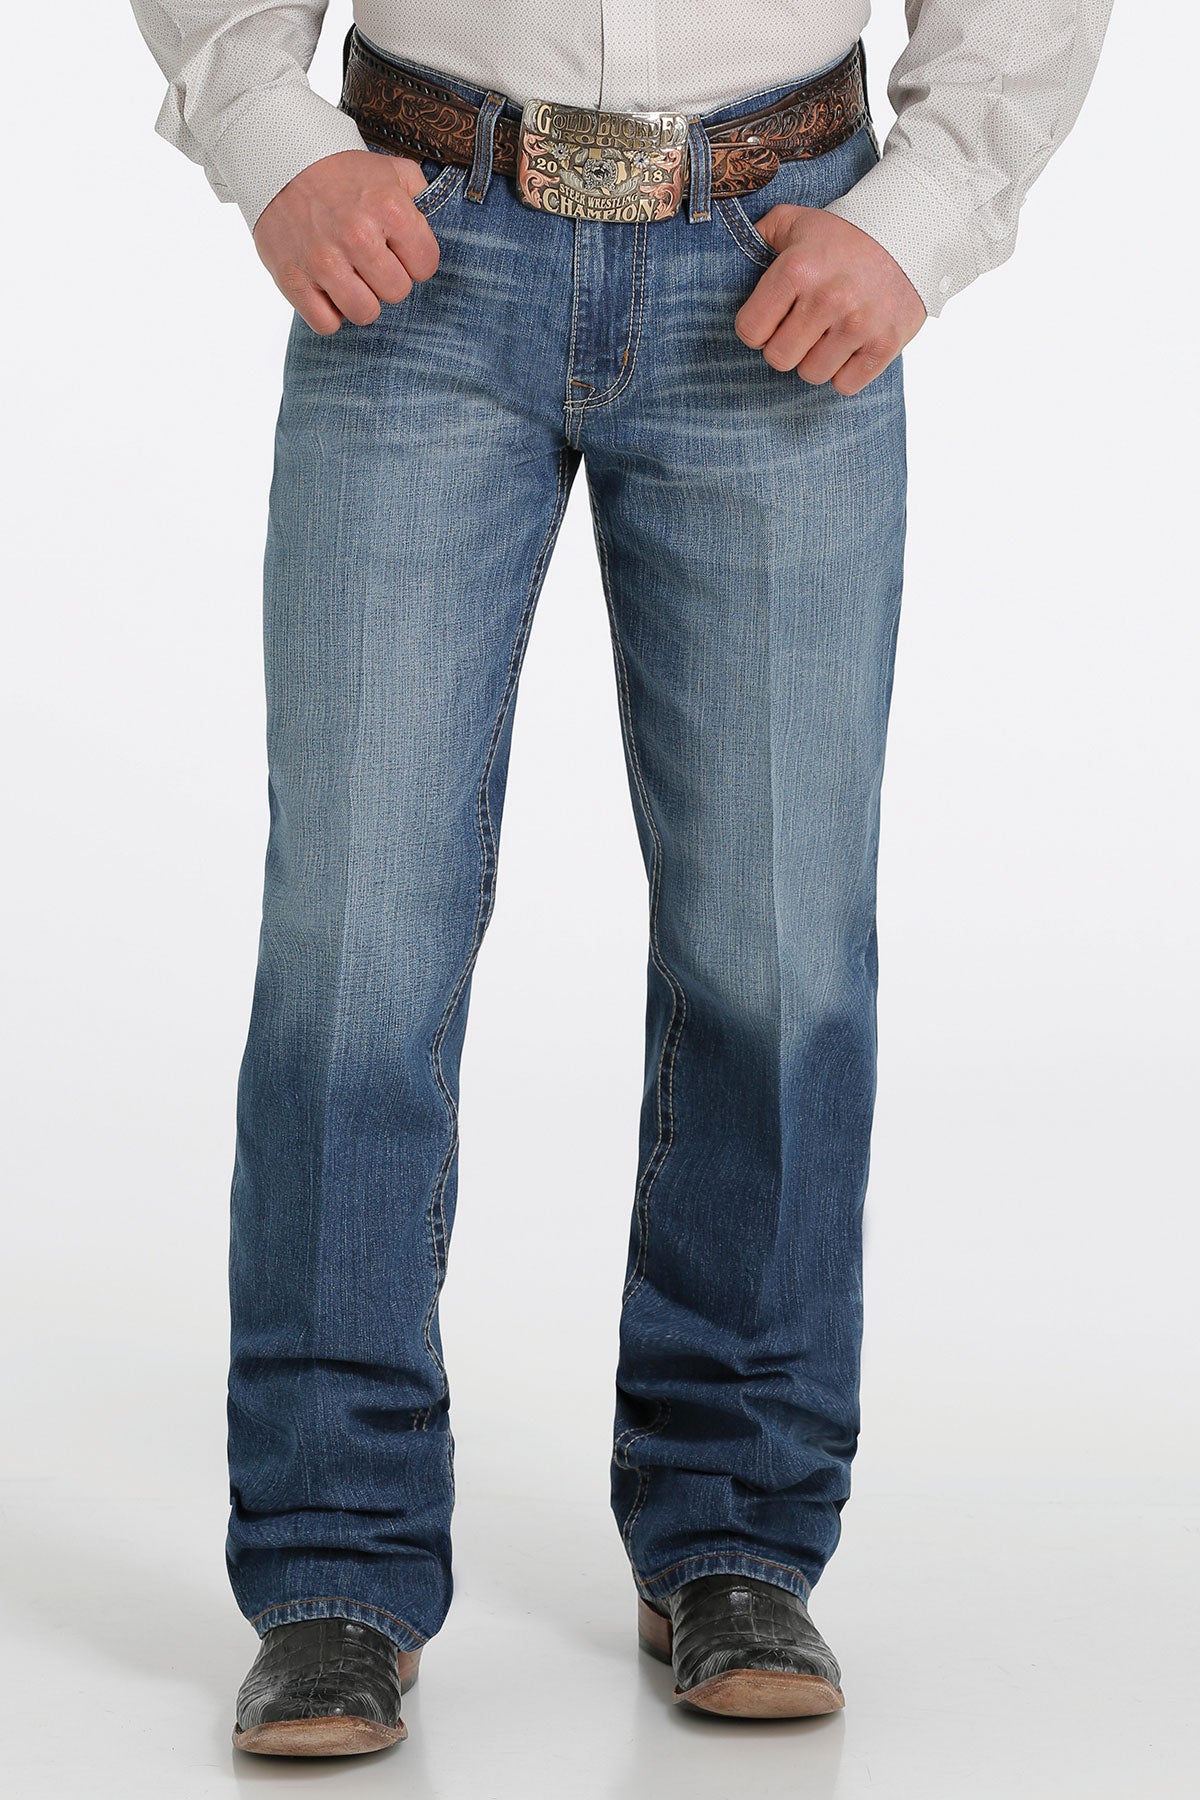 Cinch Men's Grant Relaxed Fit Jean -Indigo